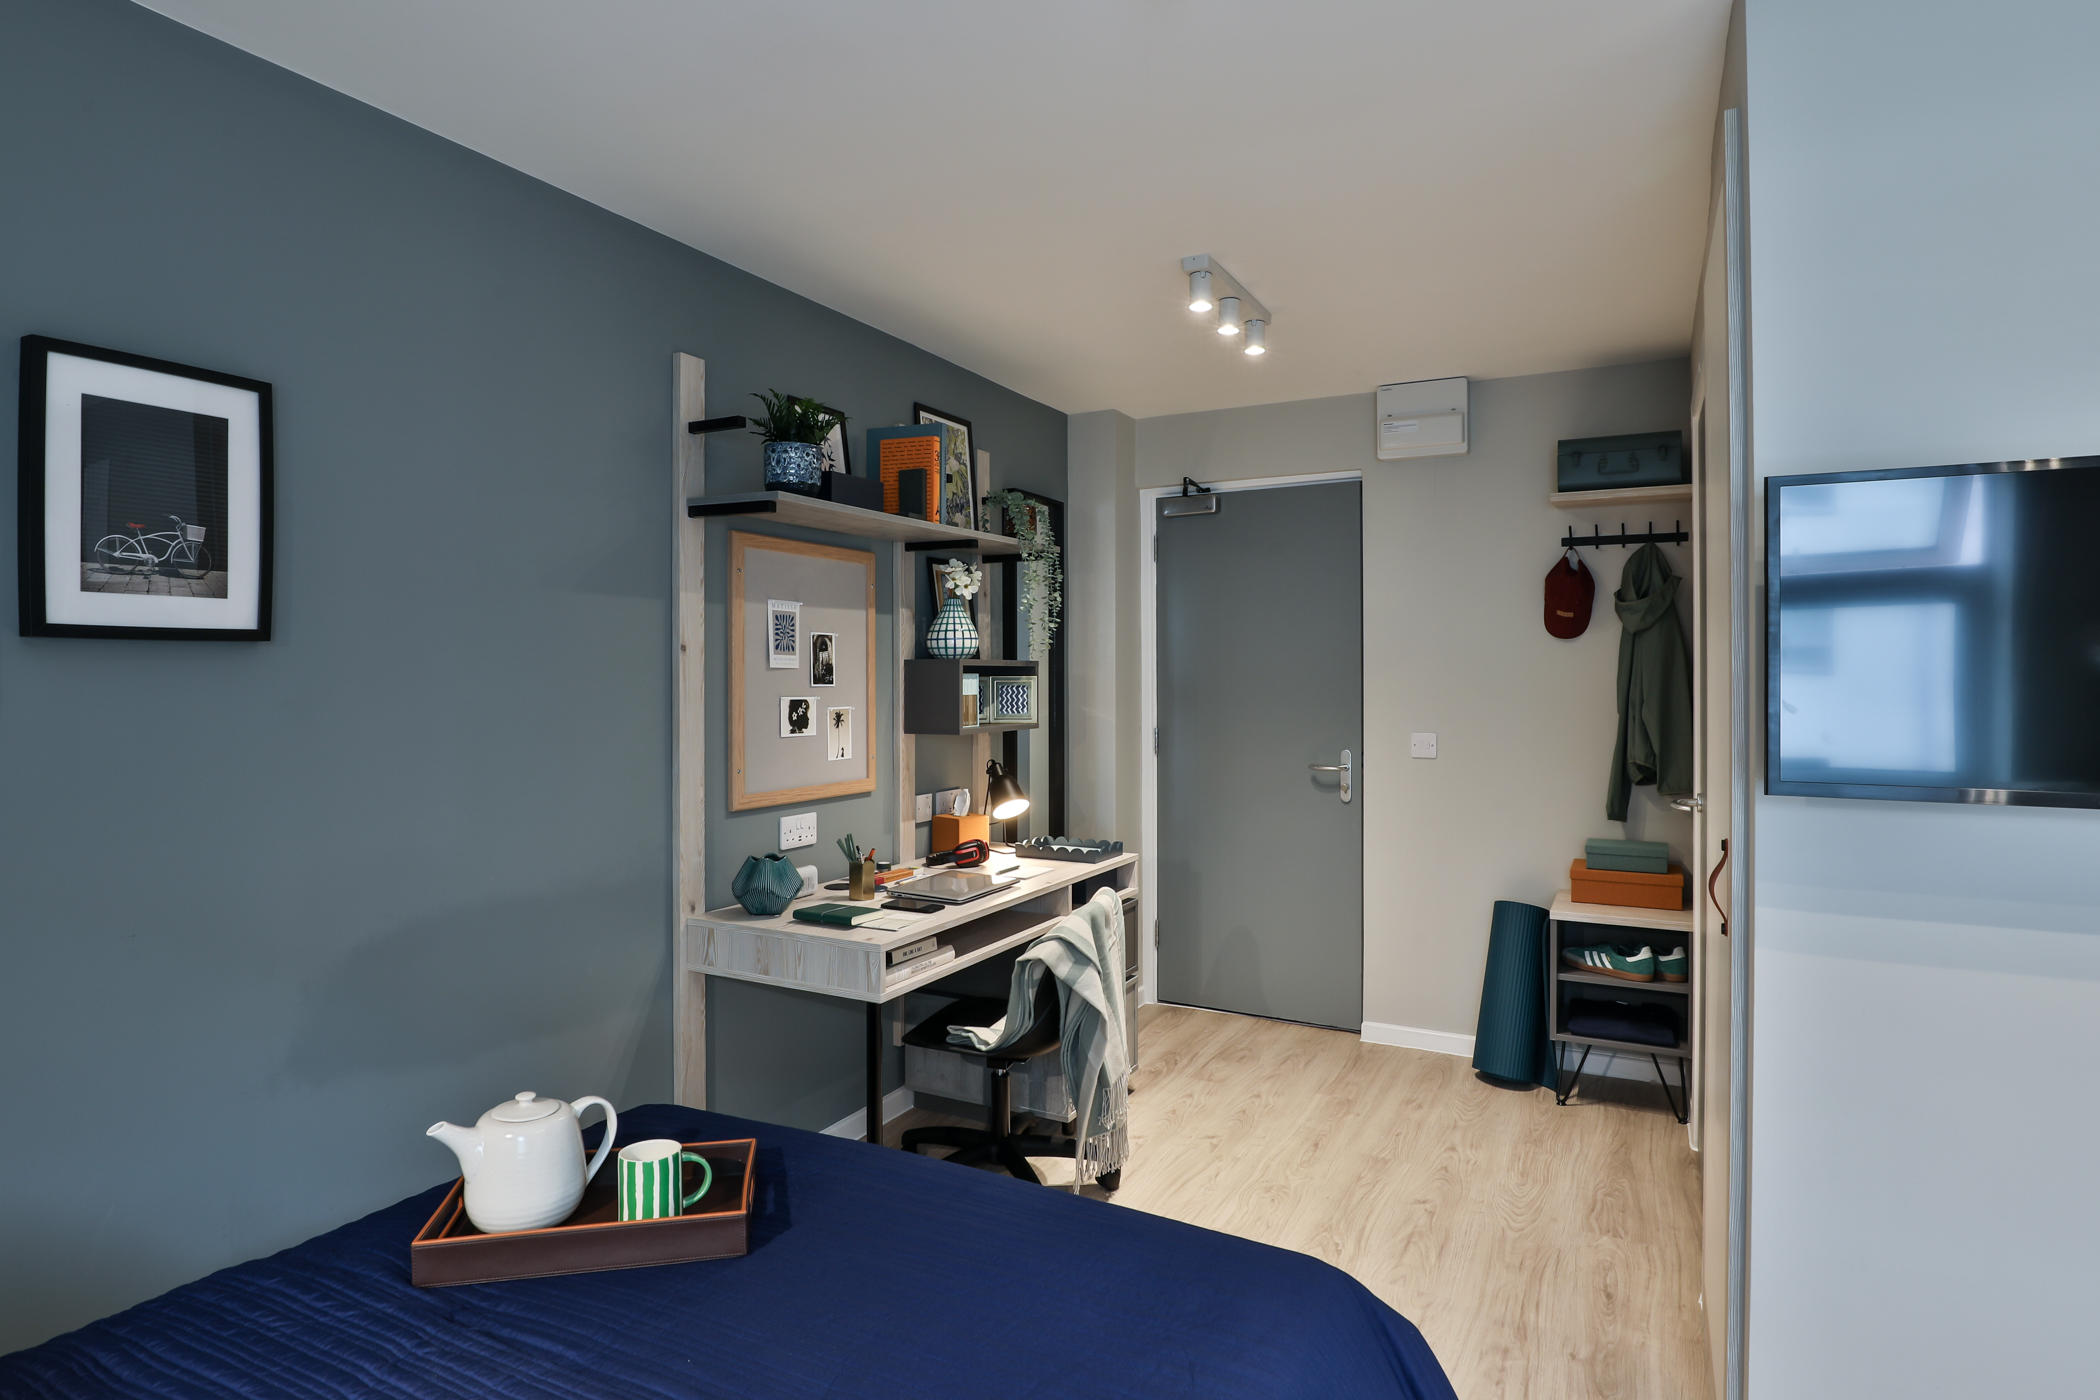 Images Hello Student Accommodation, Brook Studios